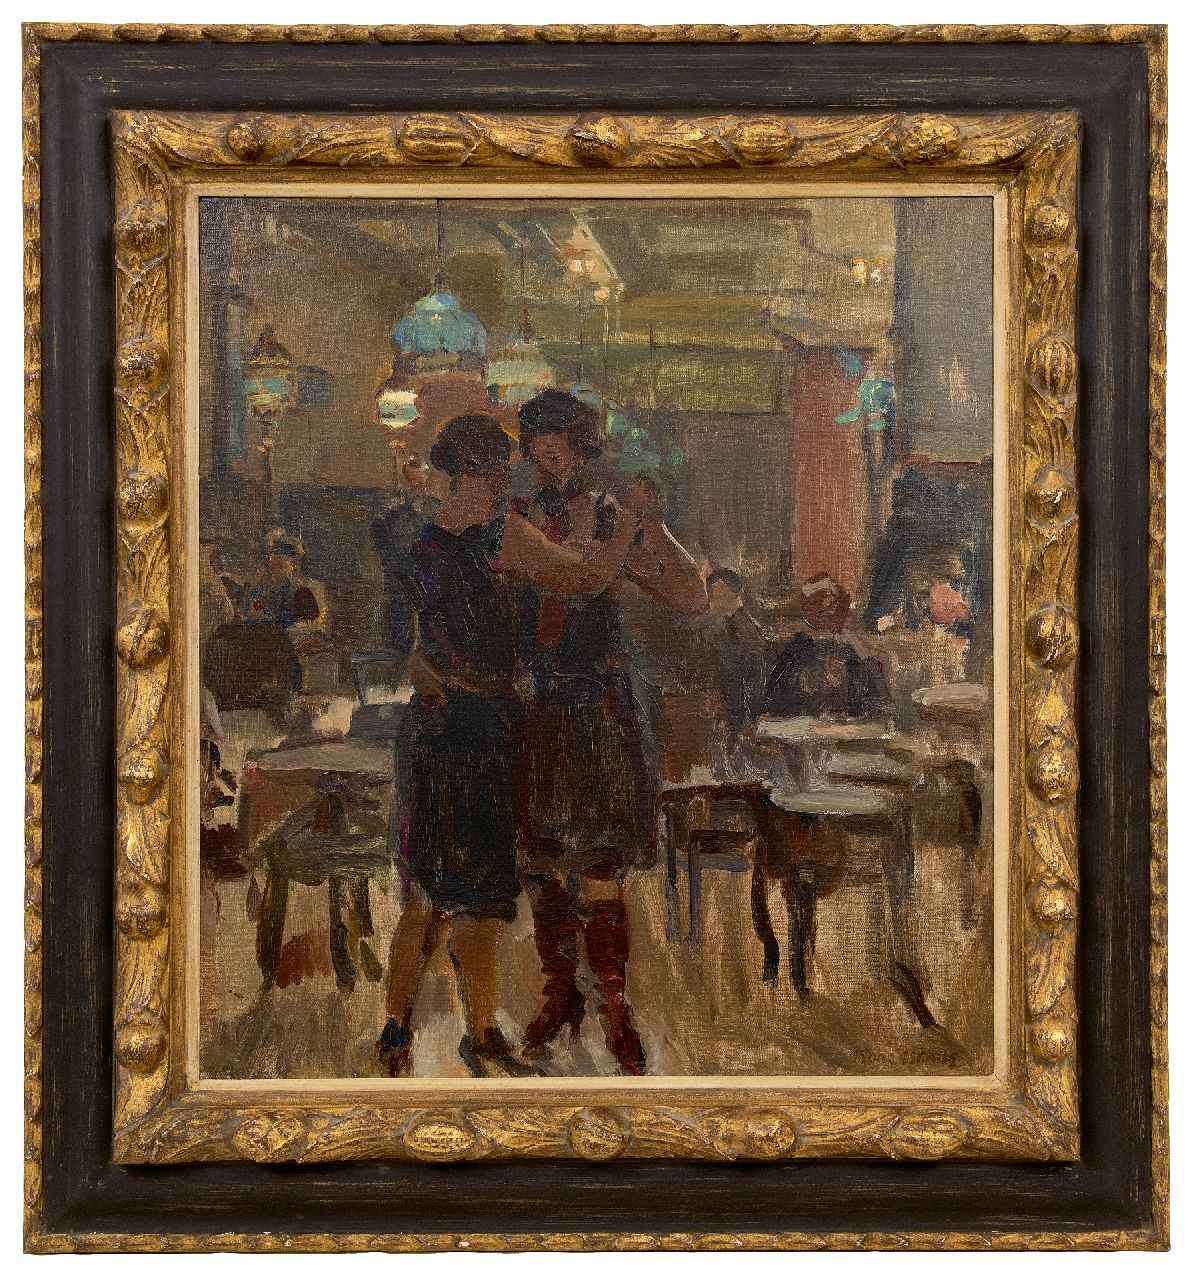 Israels I.L.  | 'Isaac' Lazarus Israels, The café Scala, The Hague, oil on canvas 65.0 x 58.0 cm, signed l.r. and painted between 1927-1934